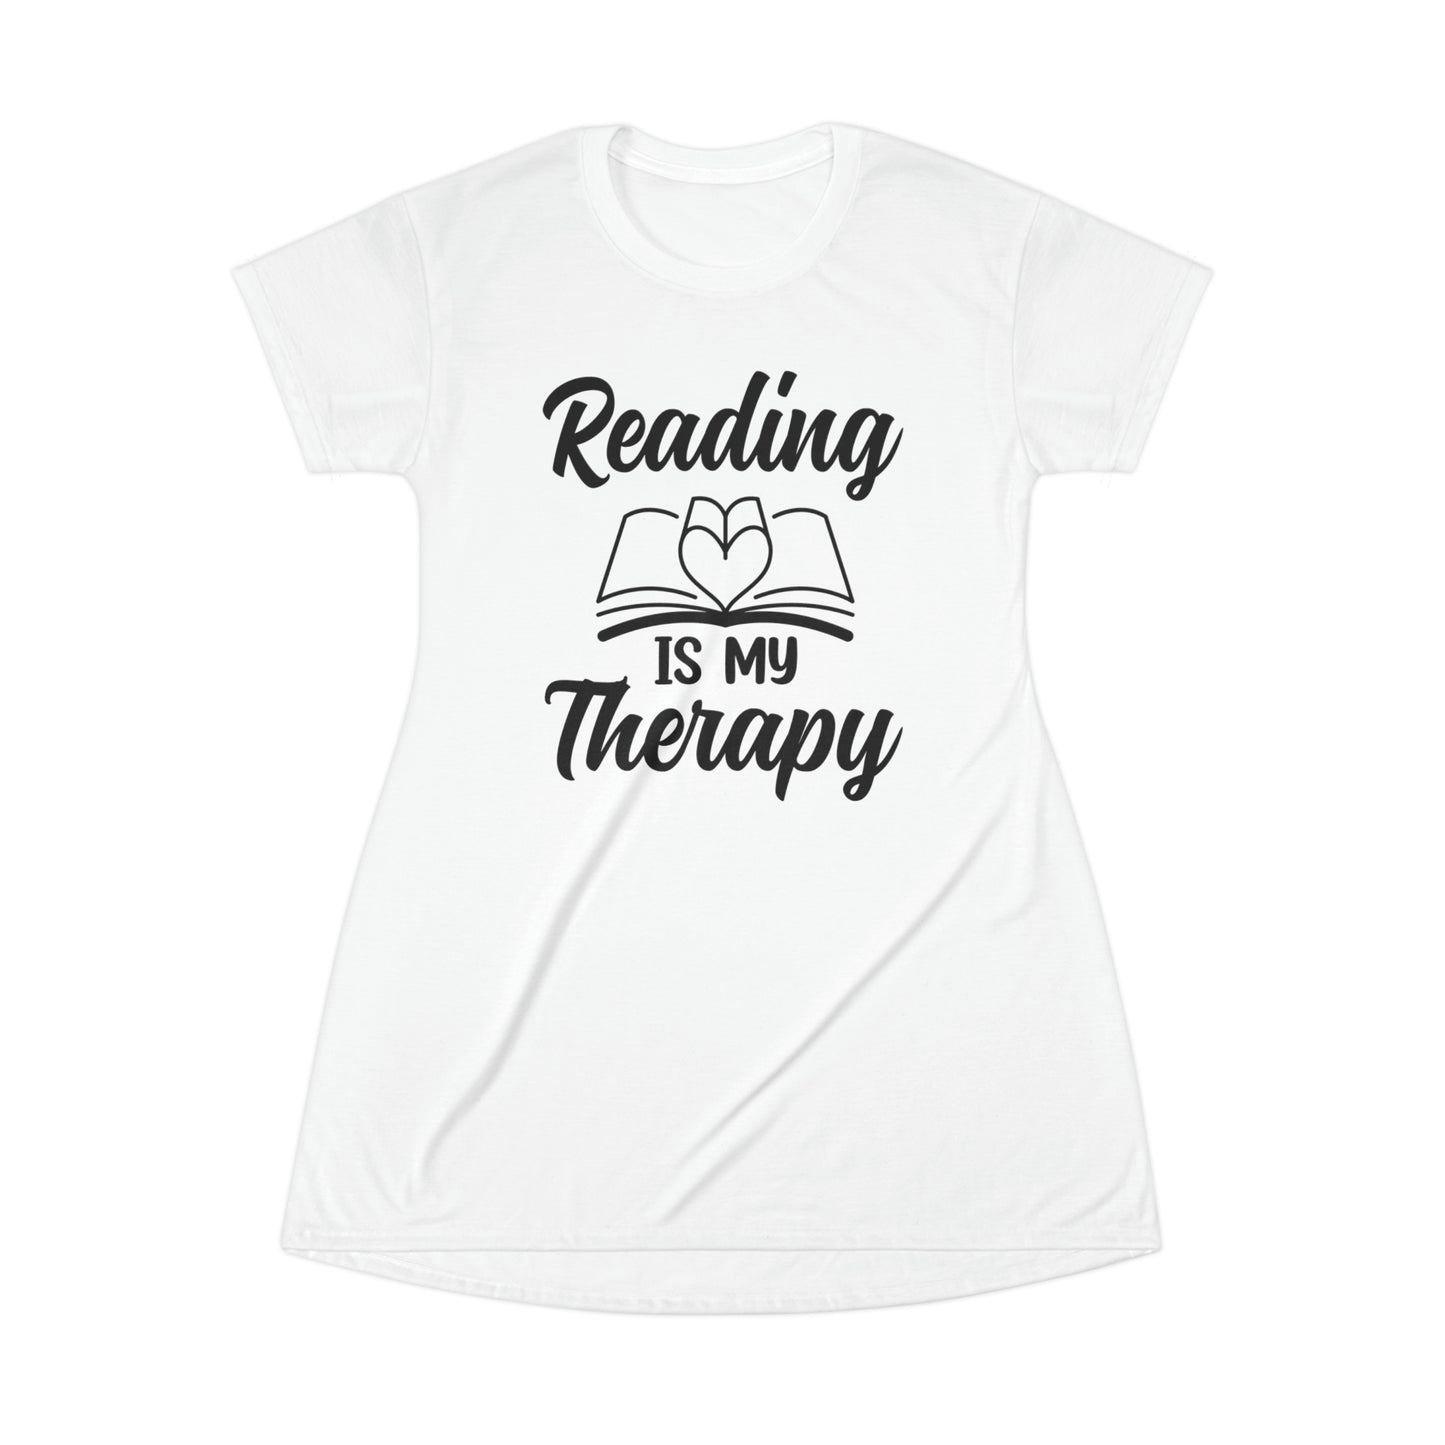 "Reading Is My Therapy" T-Shirt Dress